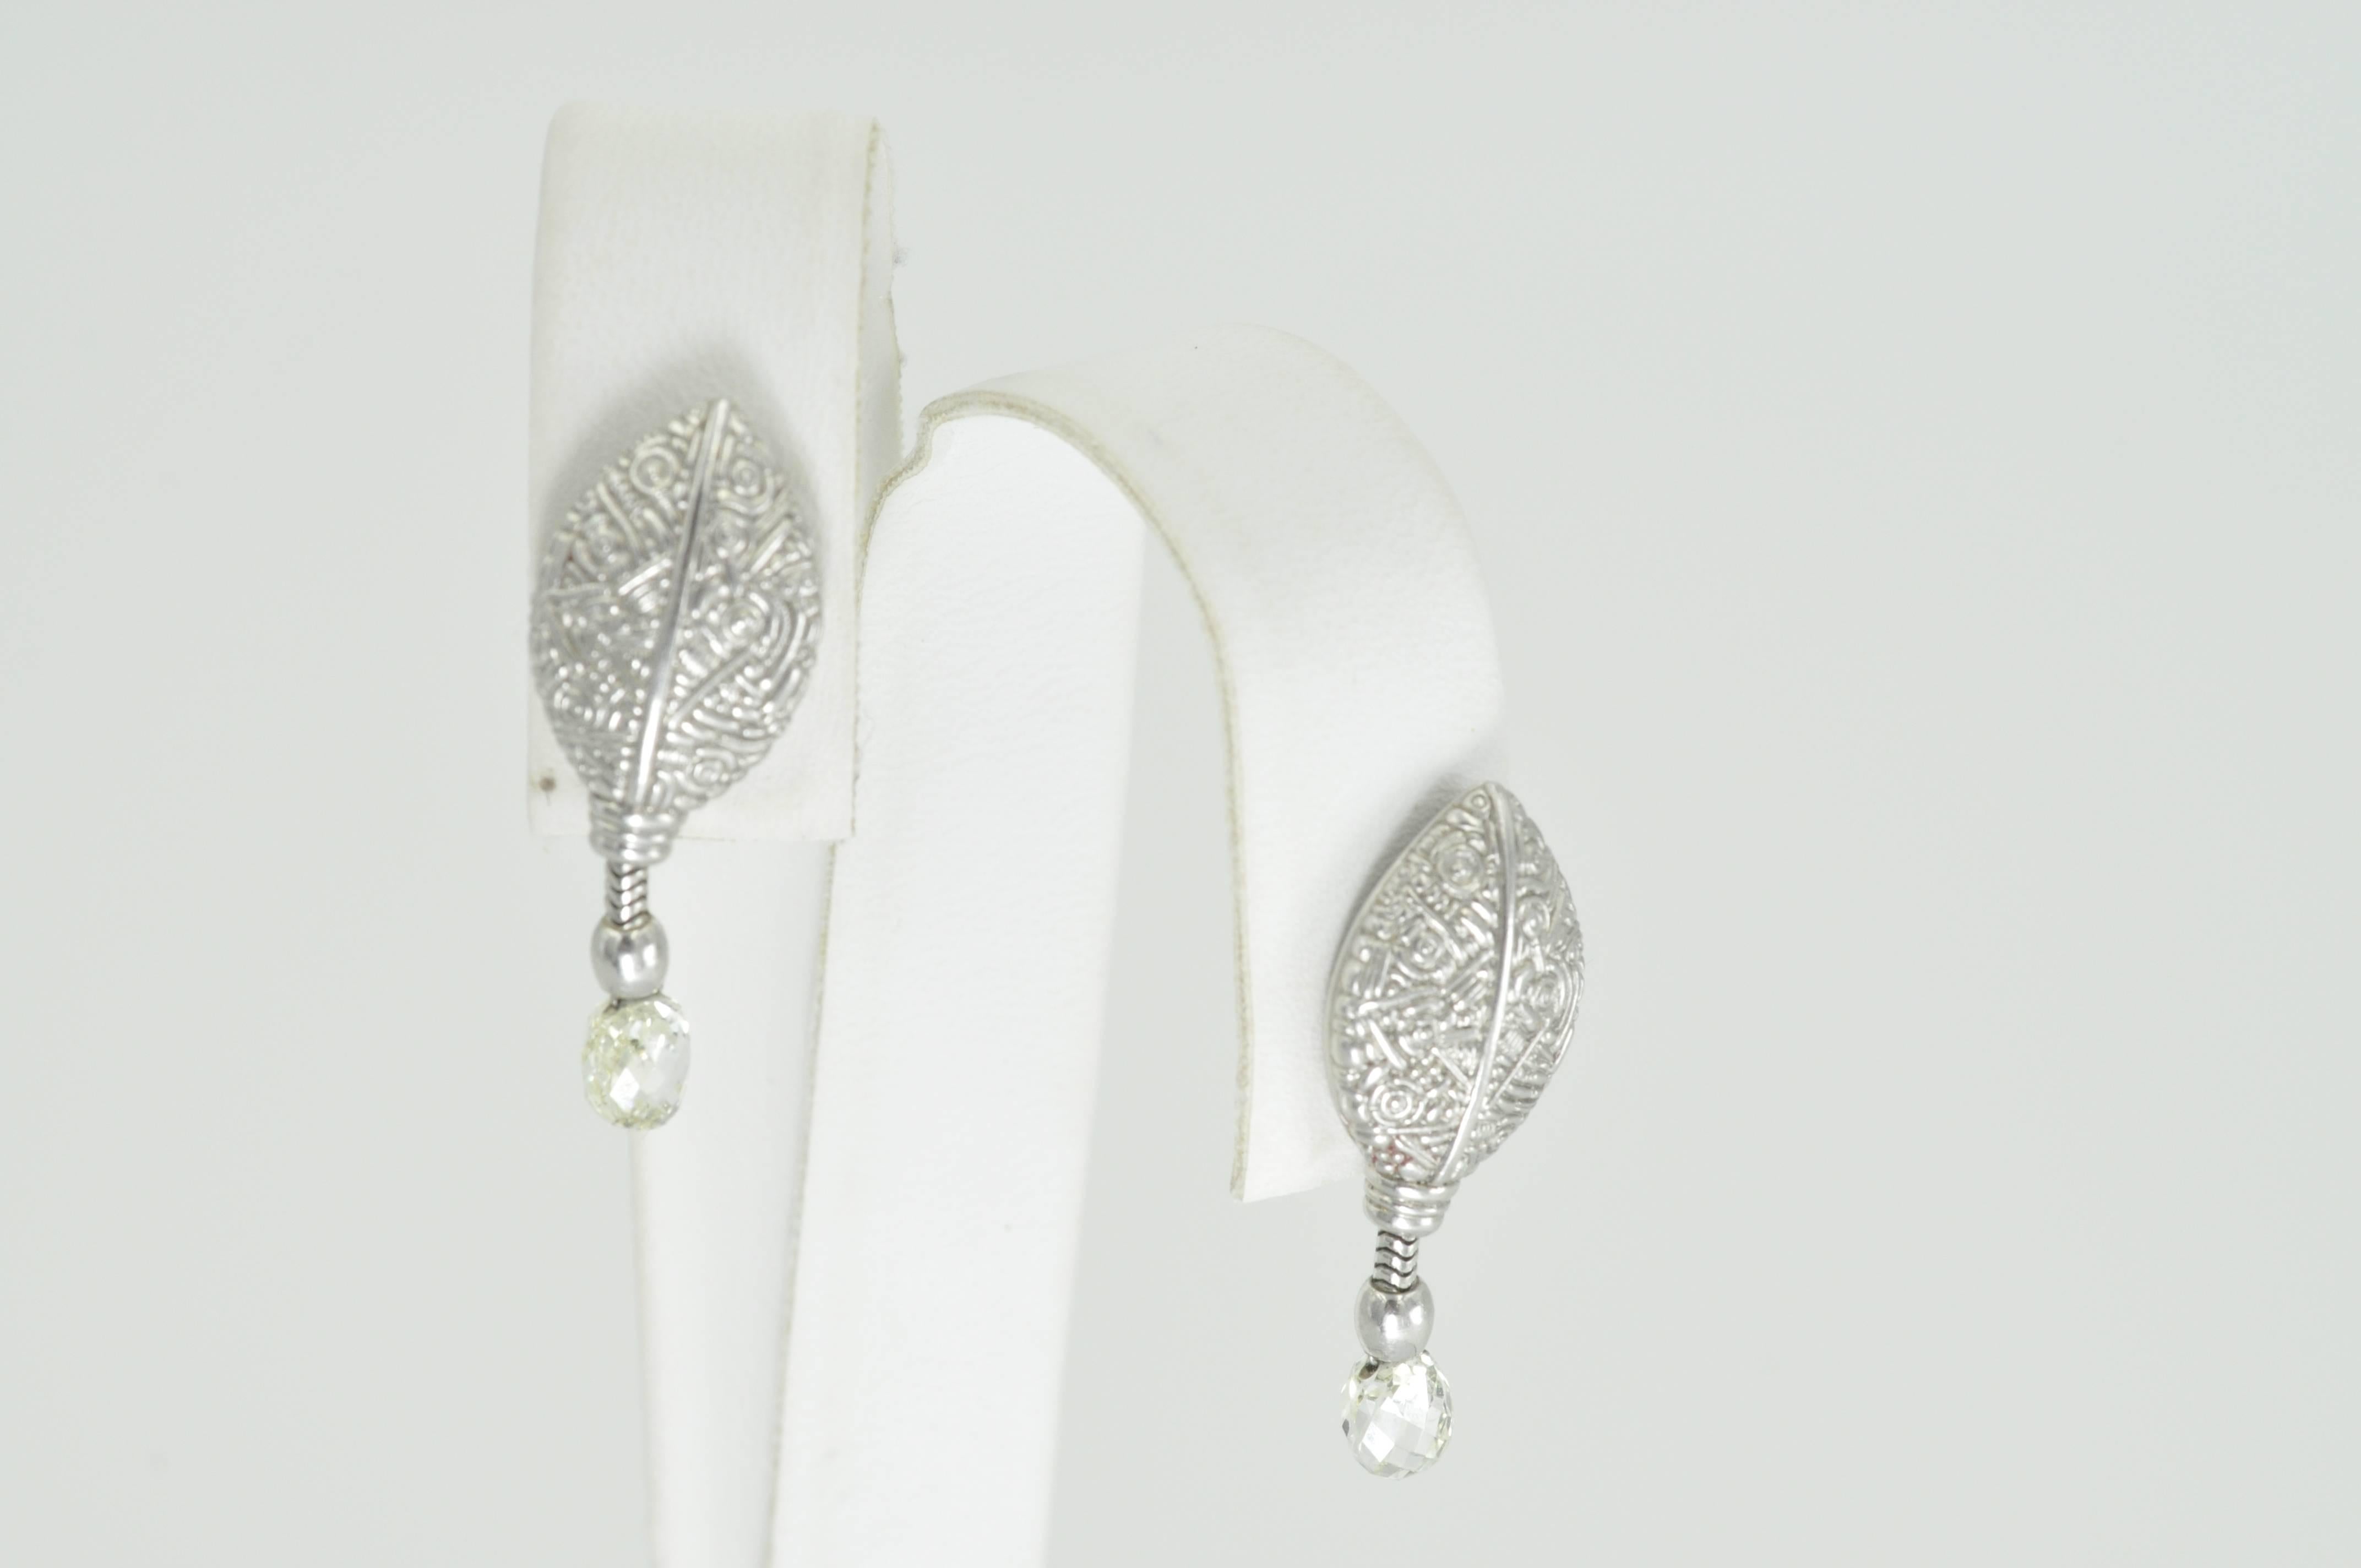 Alex Sepkus style is absolutely manifest in his Platinum Leaf Earrings with Diamond Briolet and .6CTW Diamonds. Though the design is bold, the earrings remain feminine transitioning wonderfully from casual to elegant occasions.   